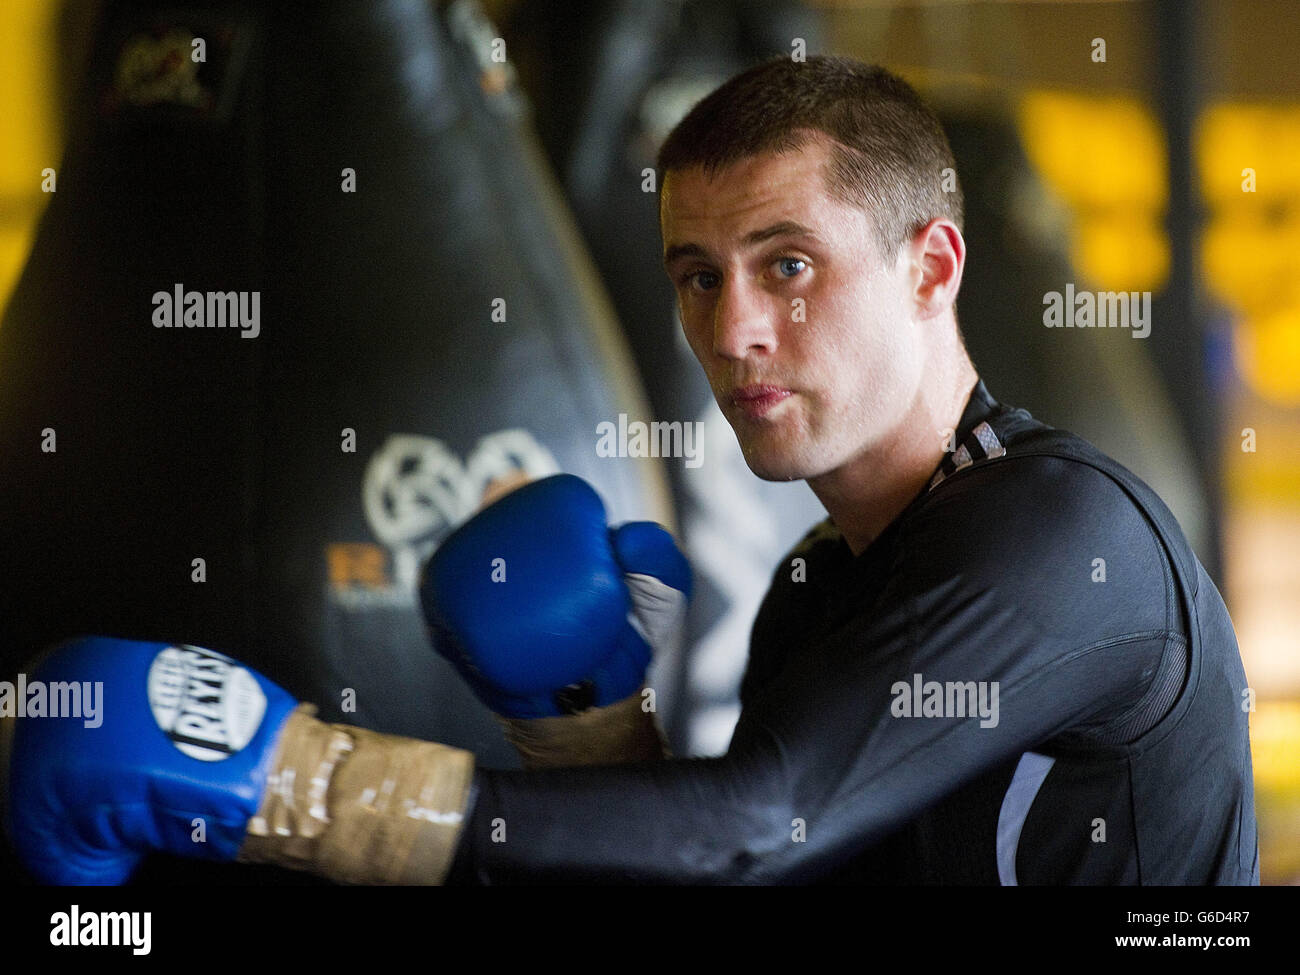 Boxing - Ricky Burns workout. Ricky Burns prepares for his title fight against Raymundo Beltran. Stock Photo